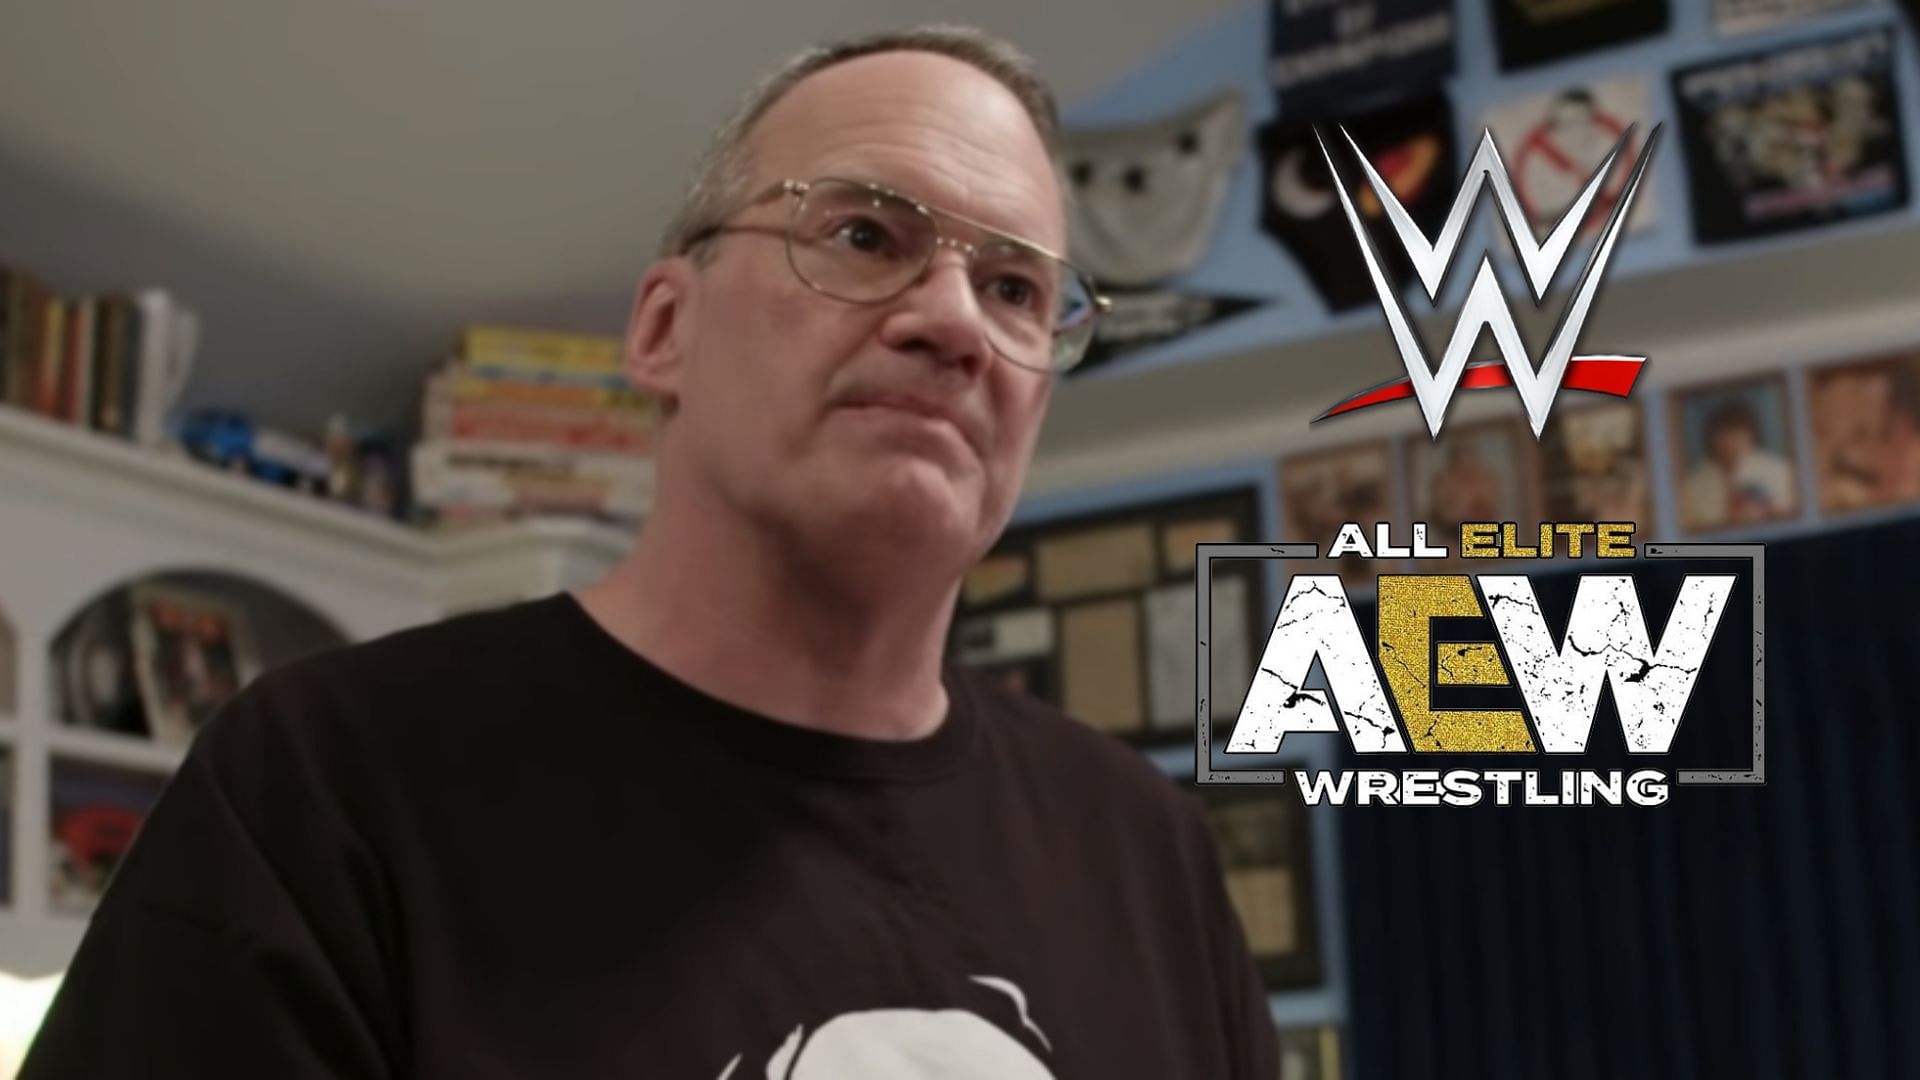 Legendary figure Jim Cornette was critical on how AEW was utilizing this former WWE tag team.